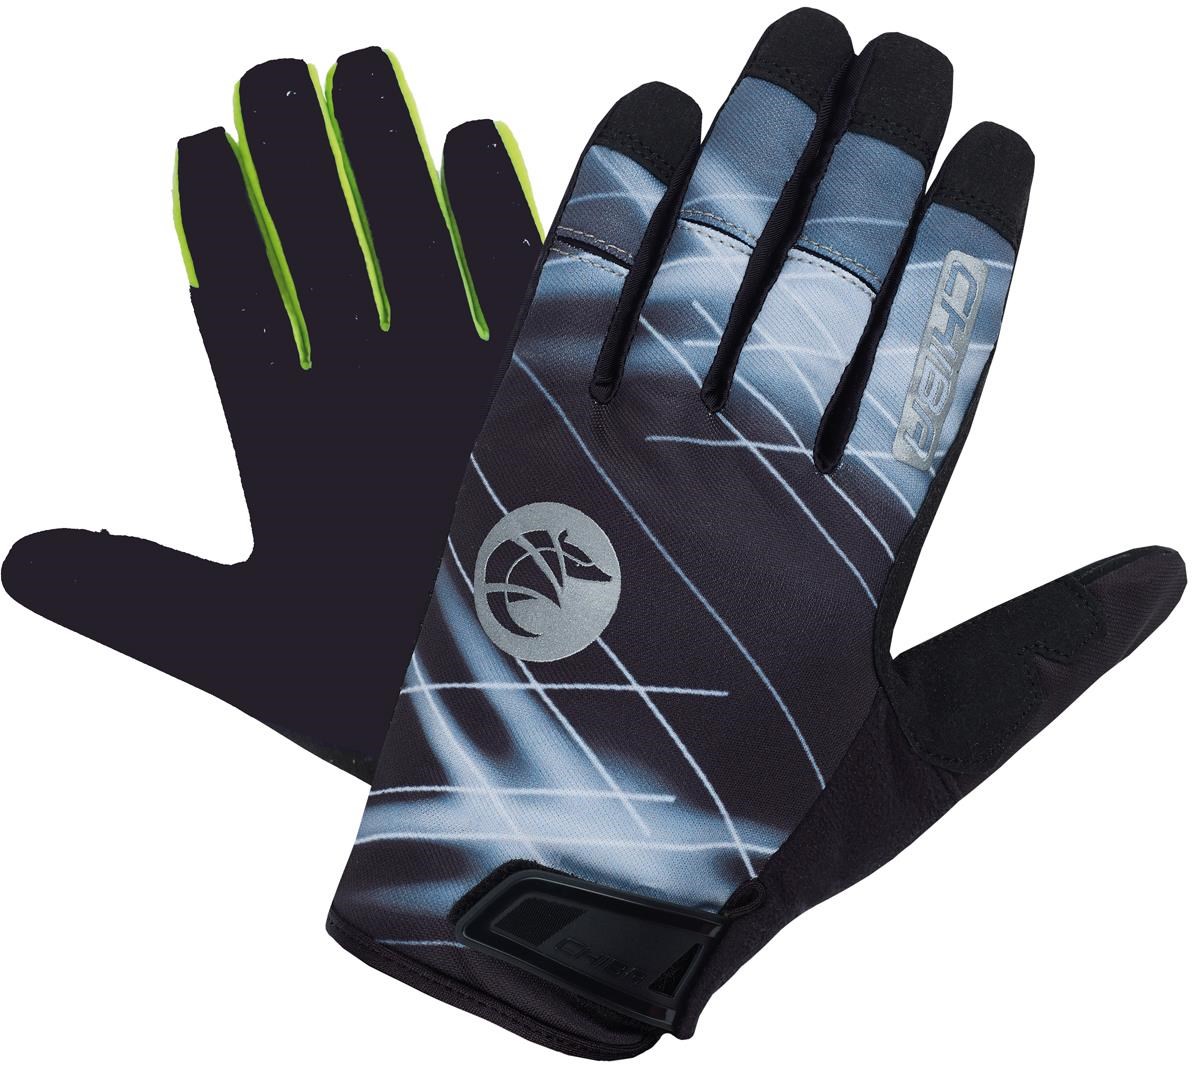 Chiba Twister Long Finger Cycling MTB Gloves product image